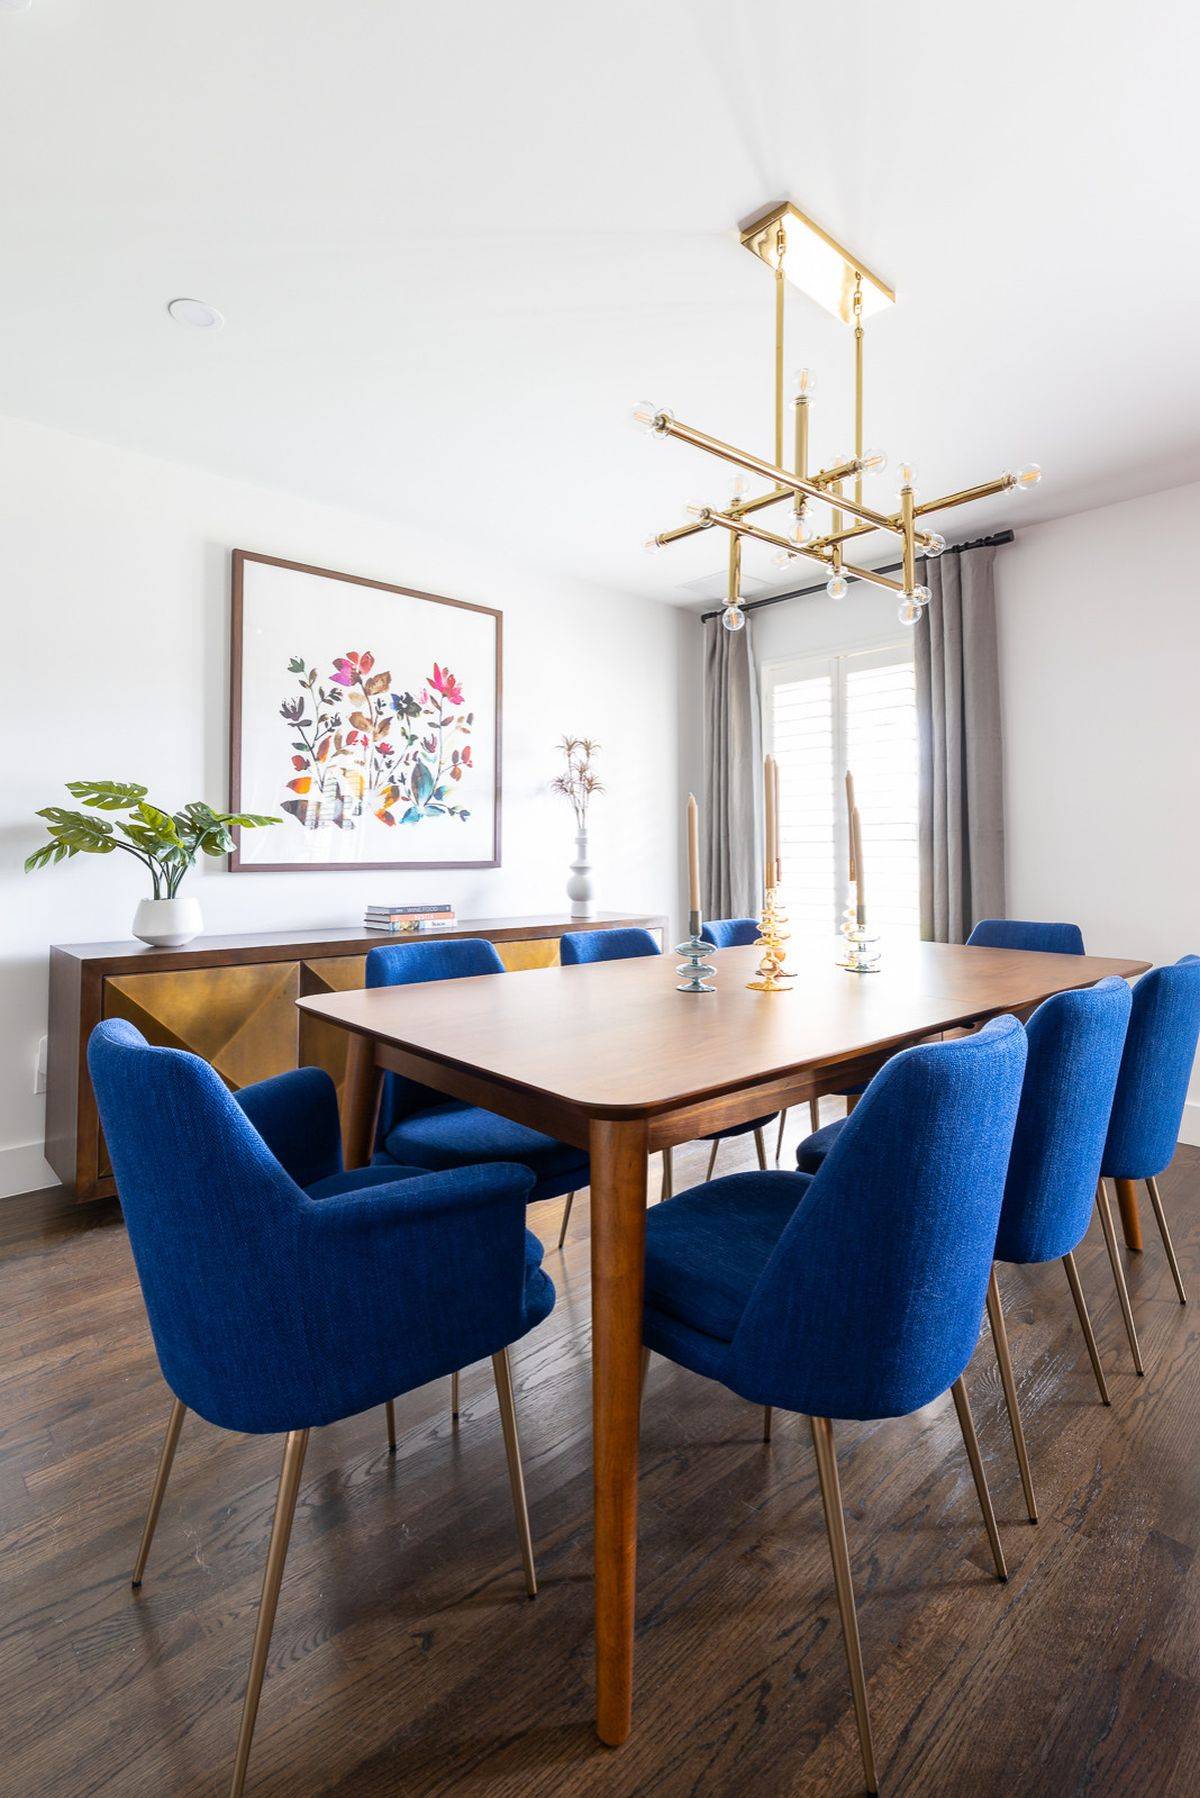 Comfortable dining table chairs bring blue to this modern white dining room